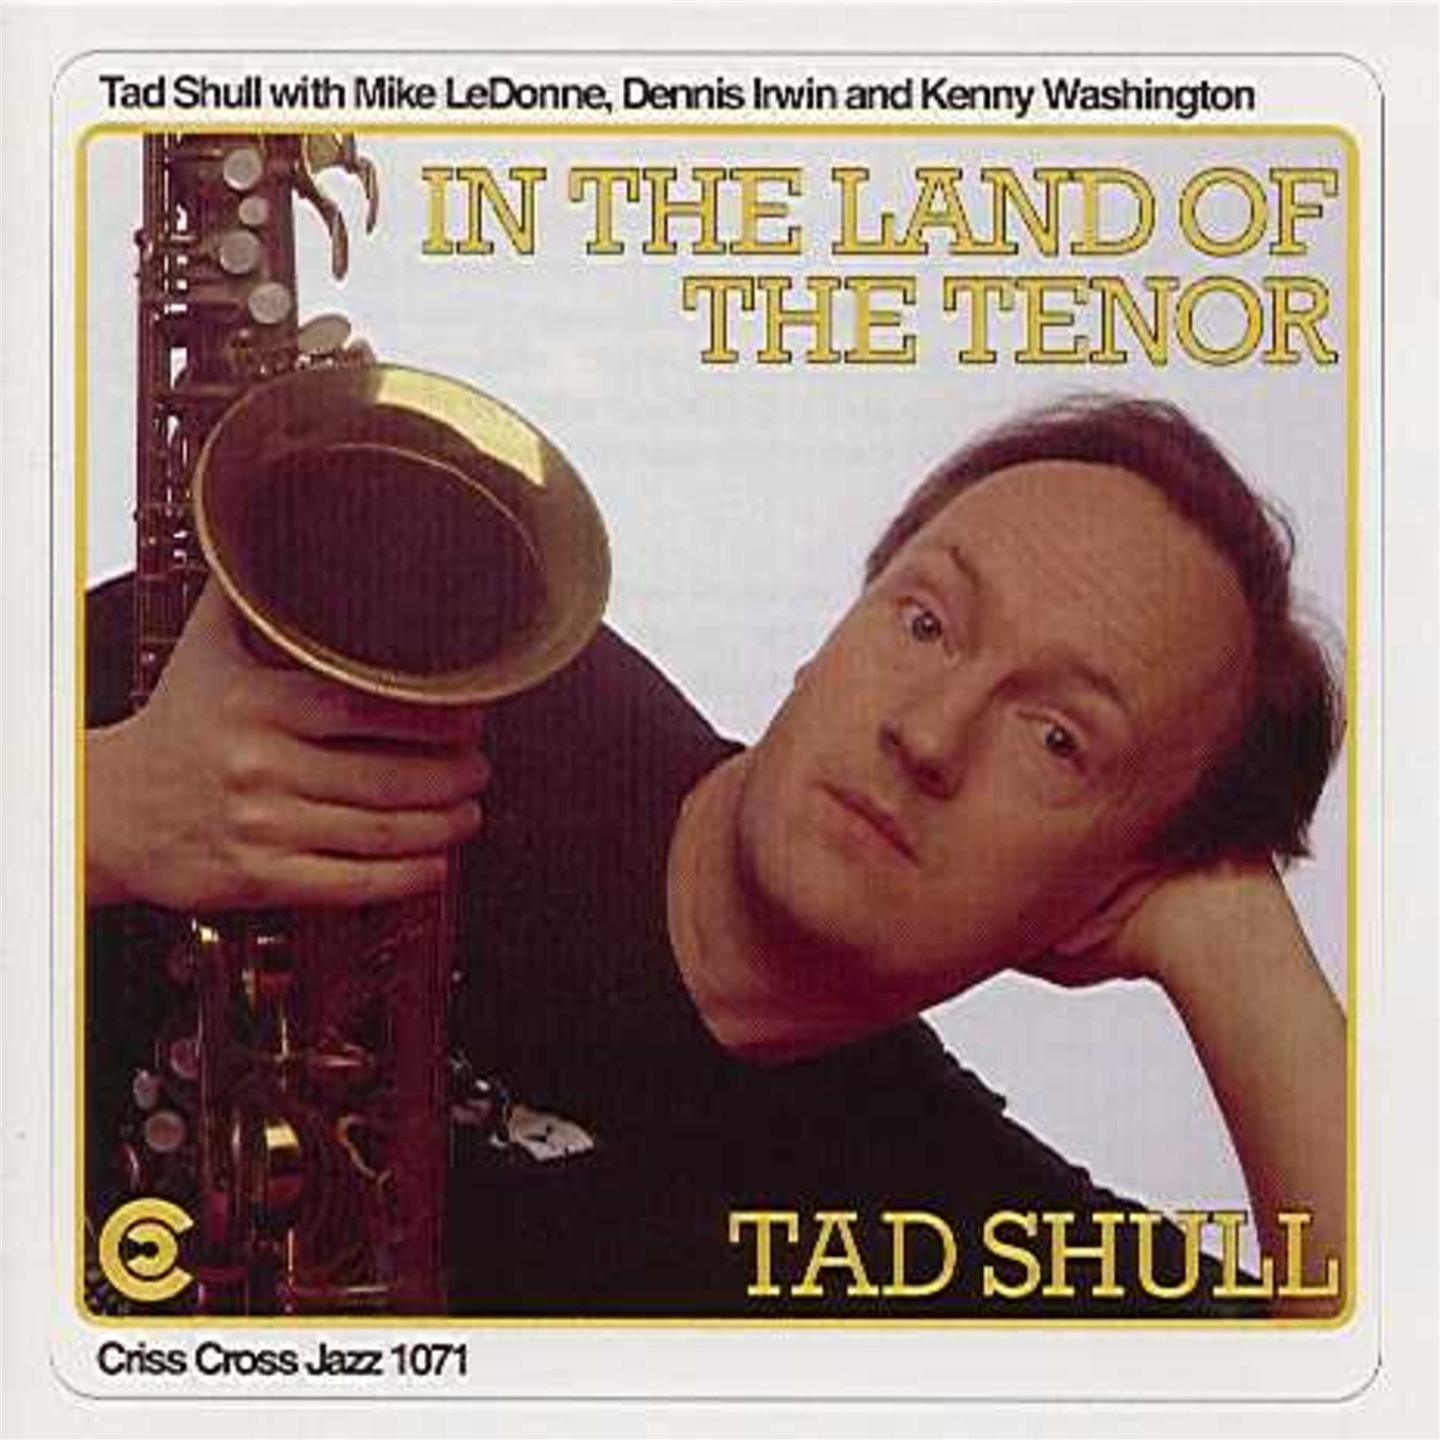 Tad Shull - In The Land Of The Tenor - Photo 1/1